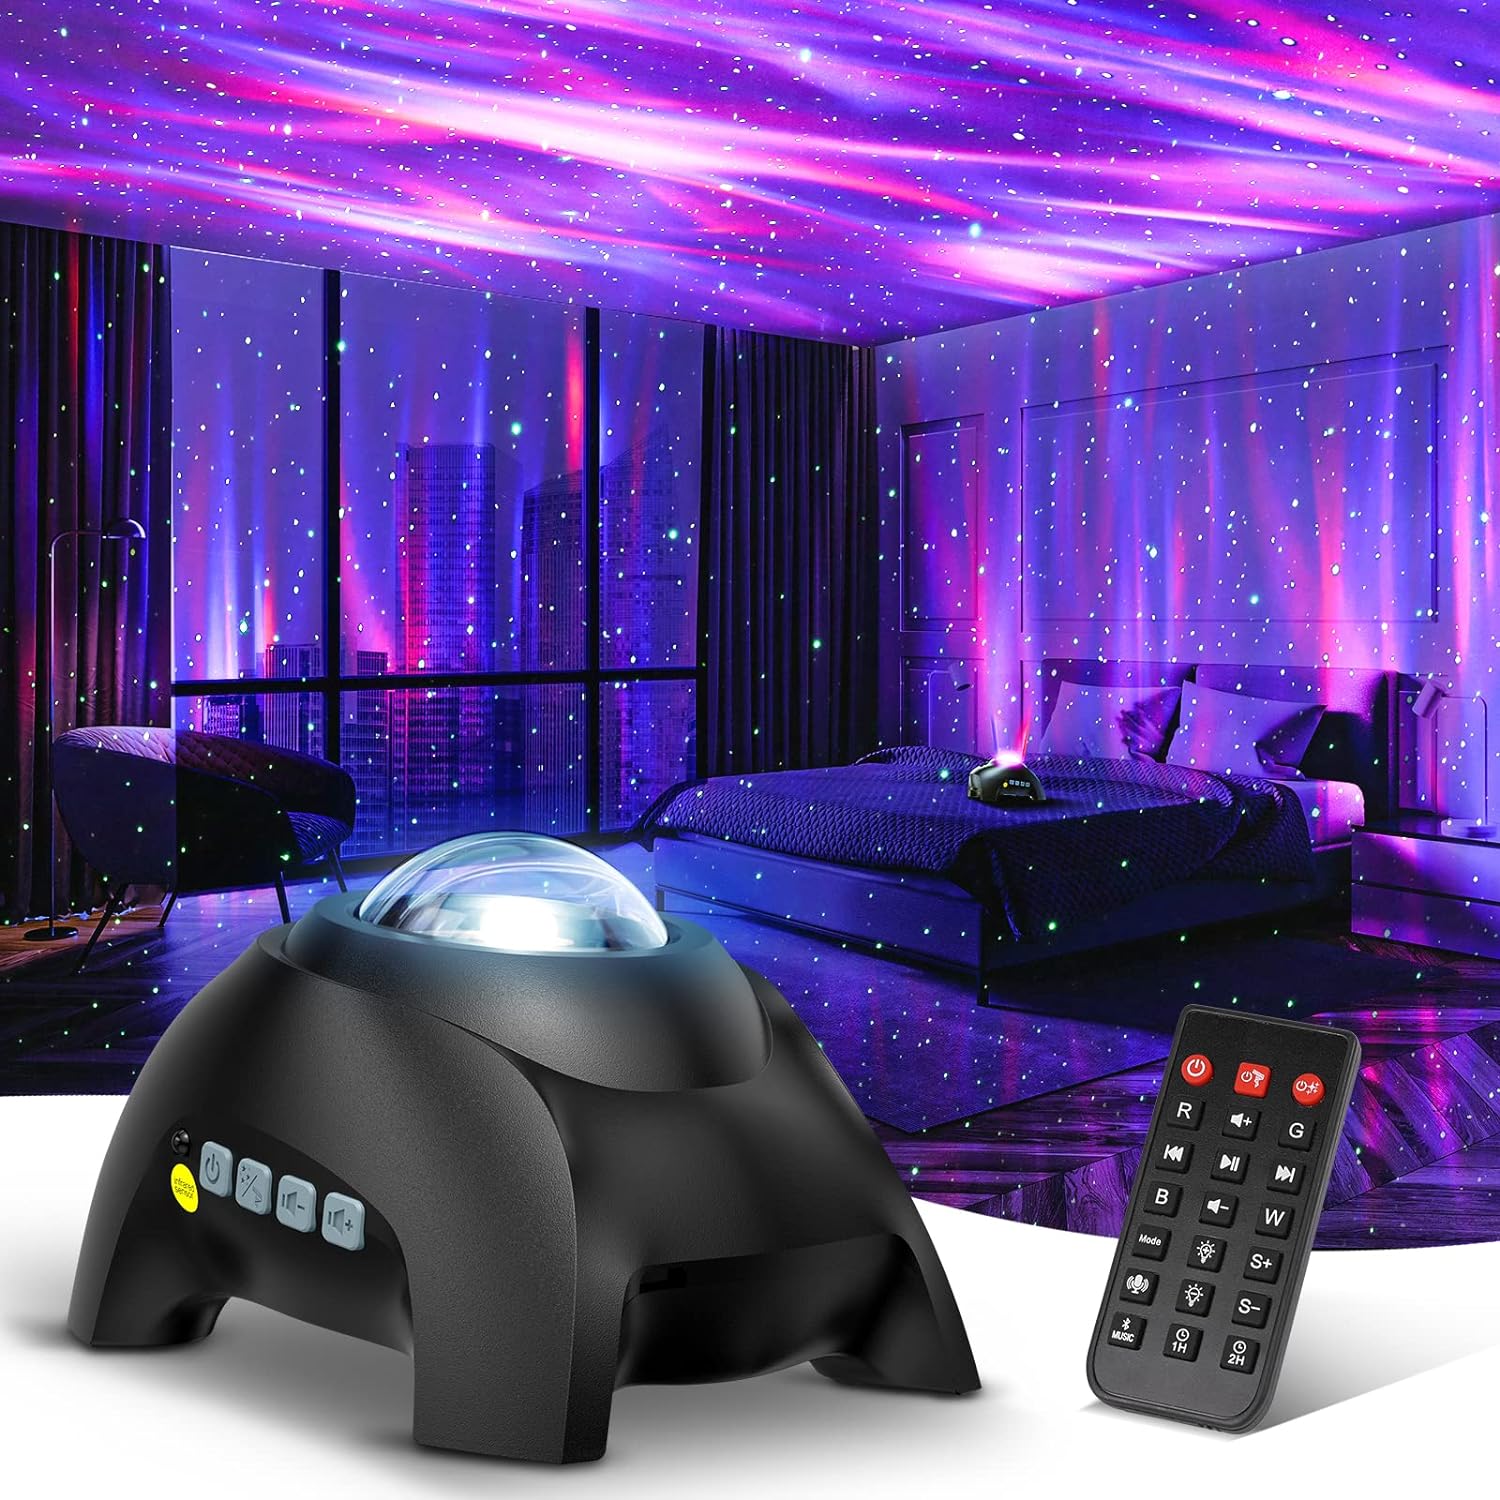 HODANS Northern Galaxy Light Aurora Projector with 33 Light Effects, Night Lights LED Star Projector for Bedroom Nebula Lamp, Remote C